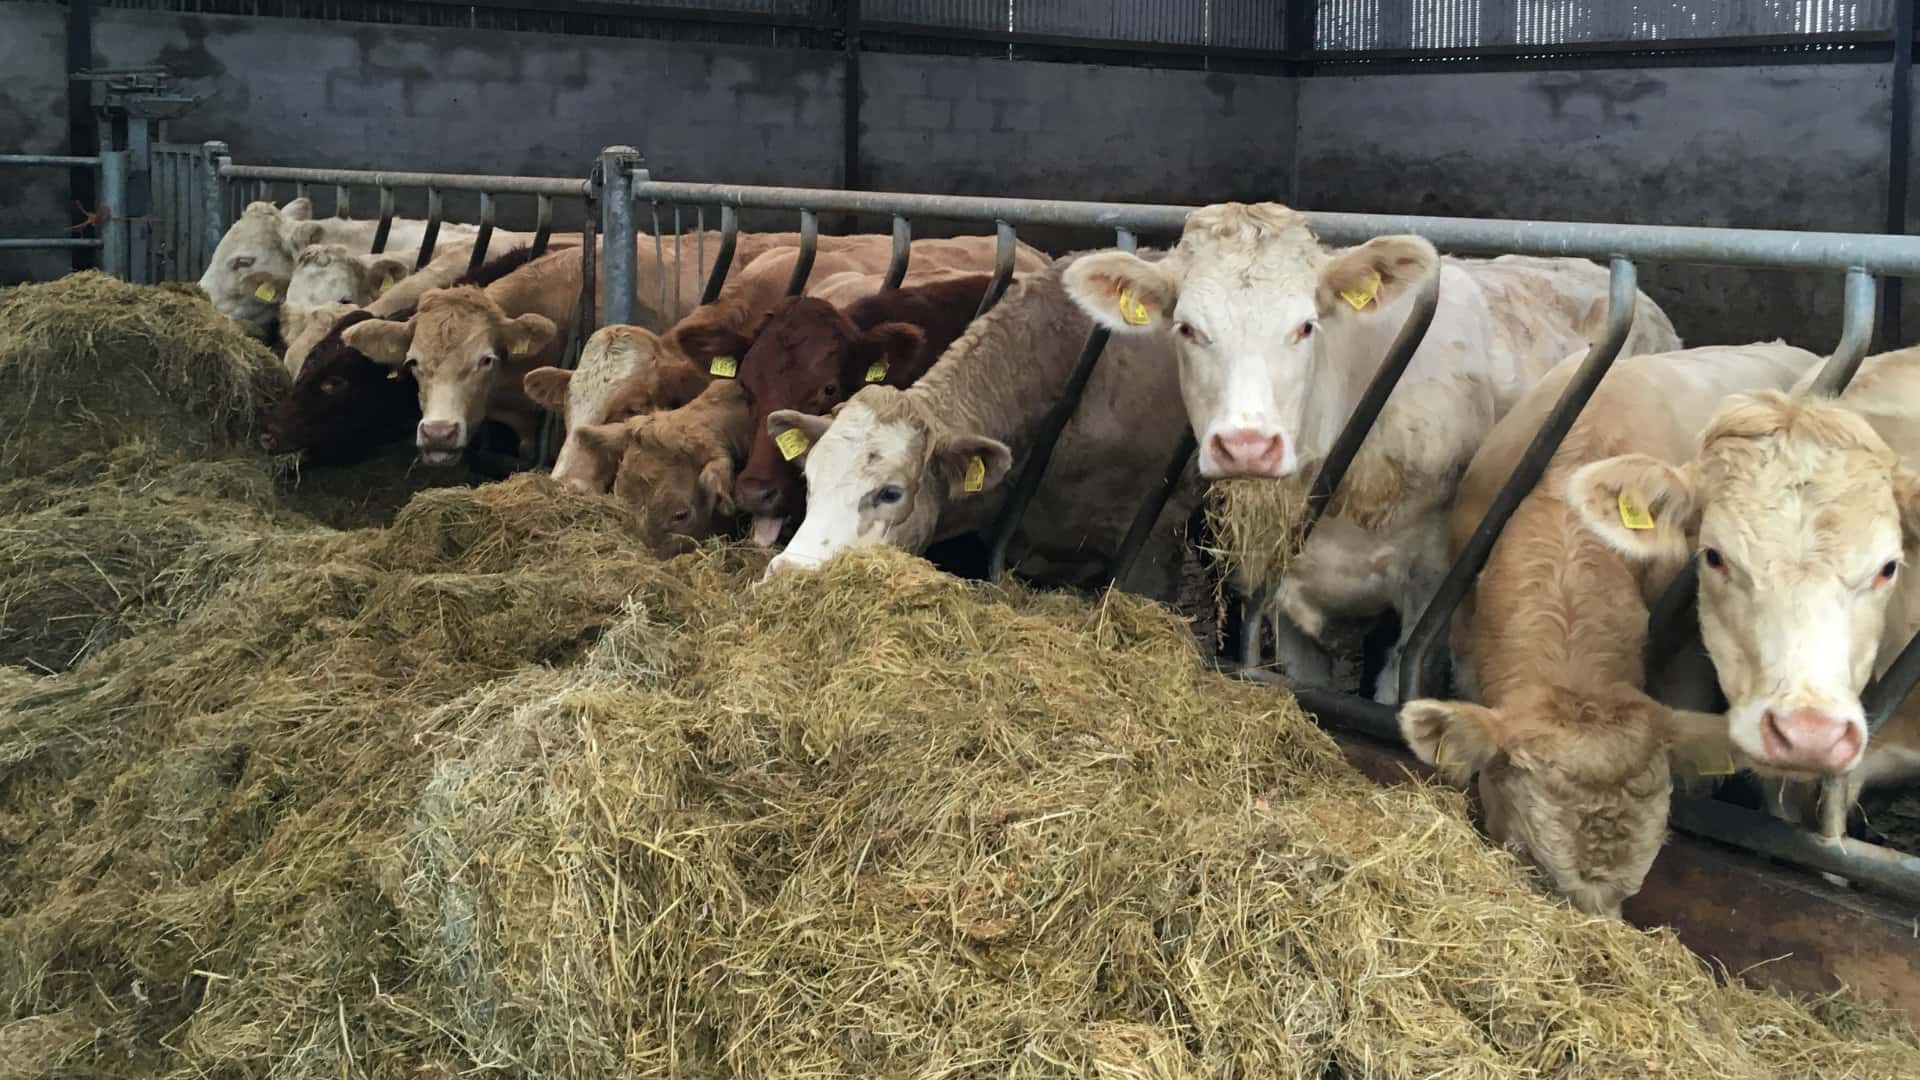 Cattle in shed